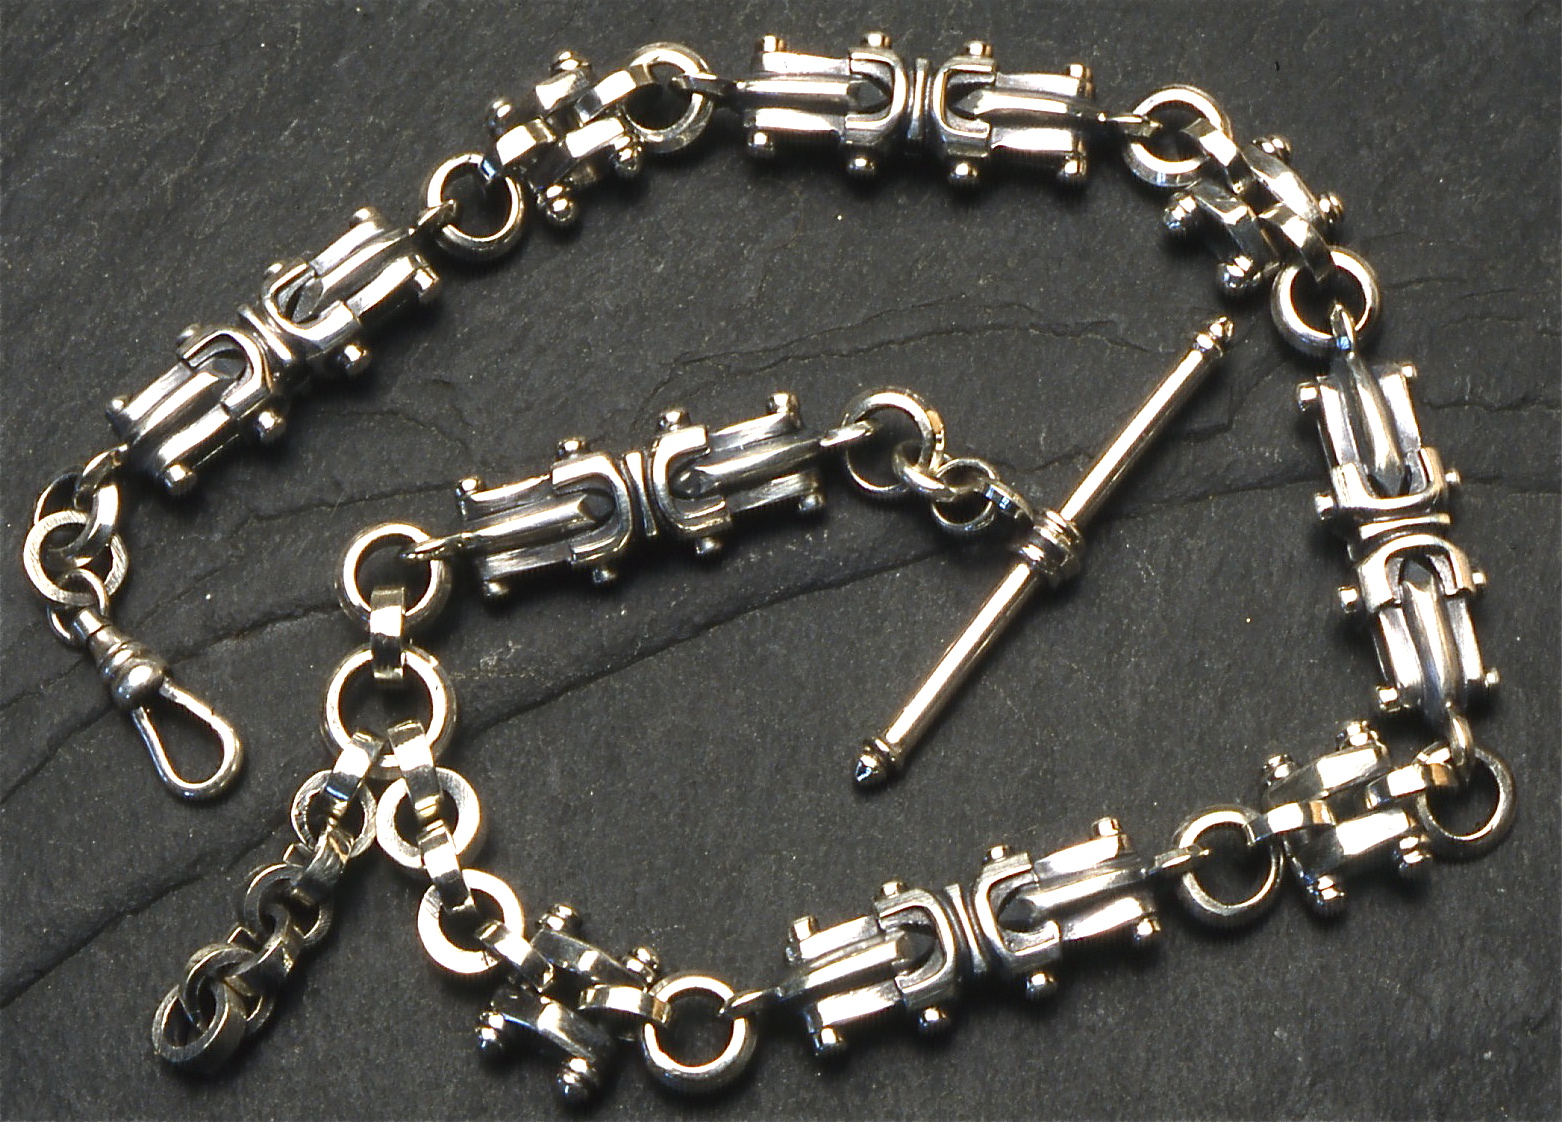 Watch chain made for Captain James West Wild Wild West